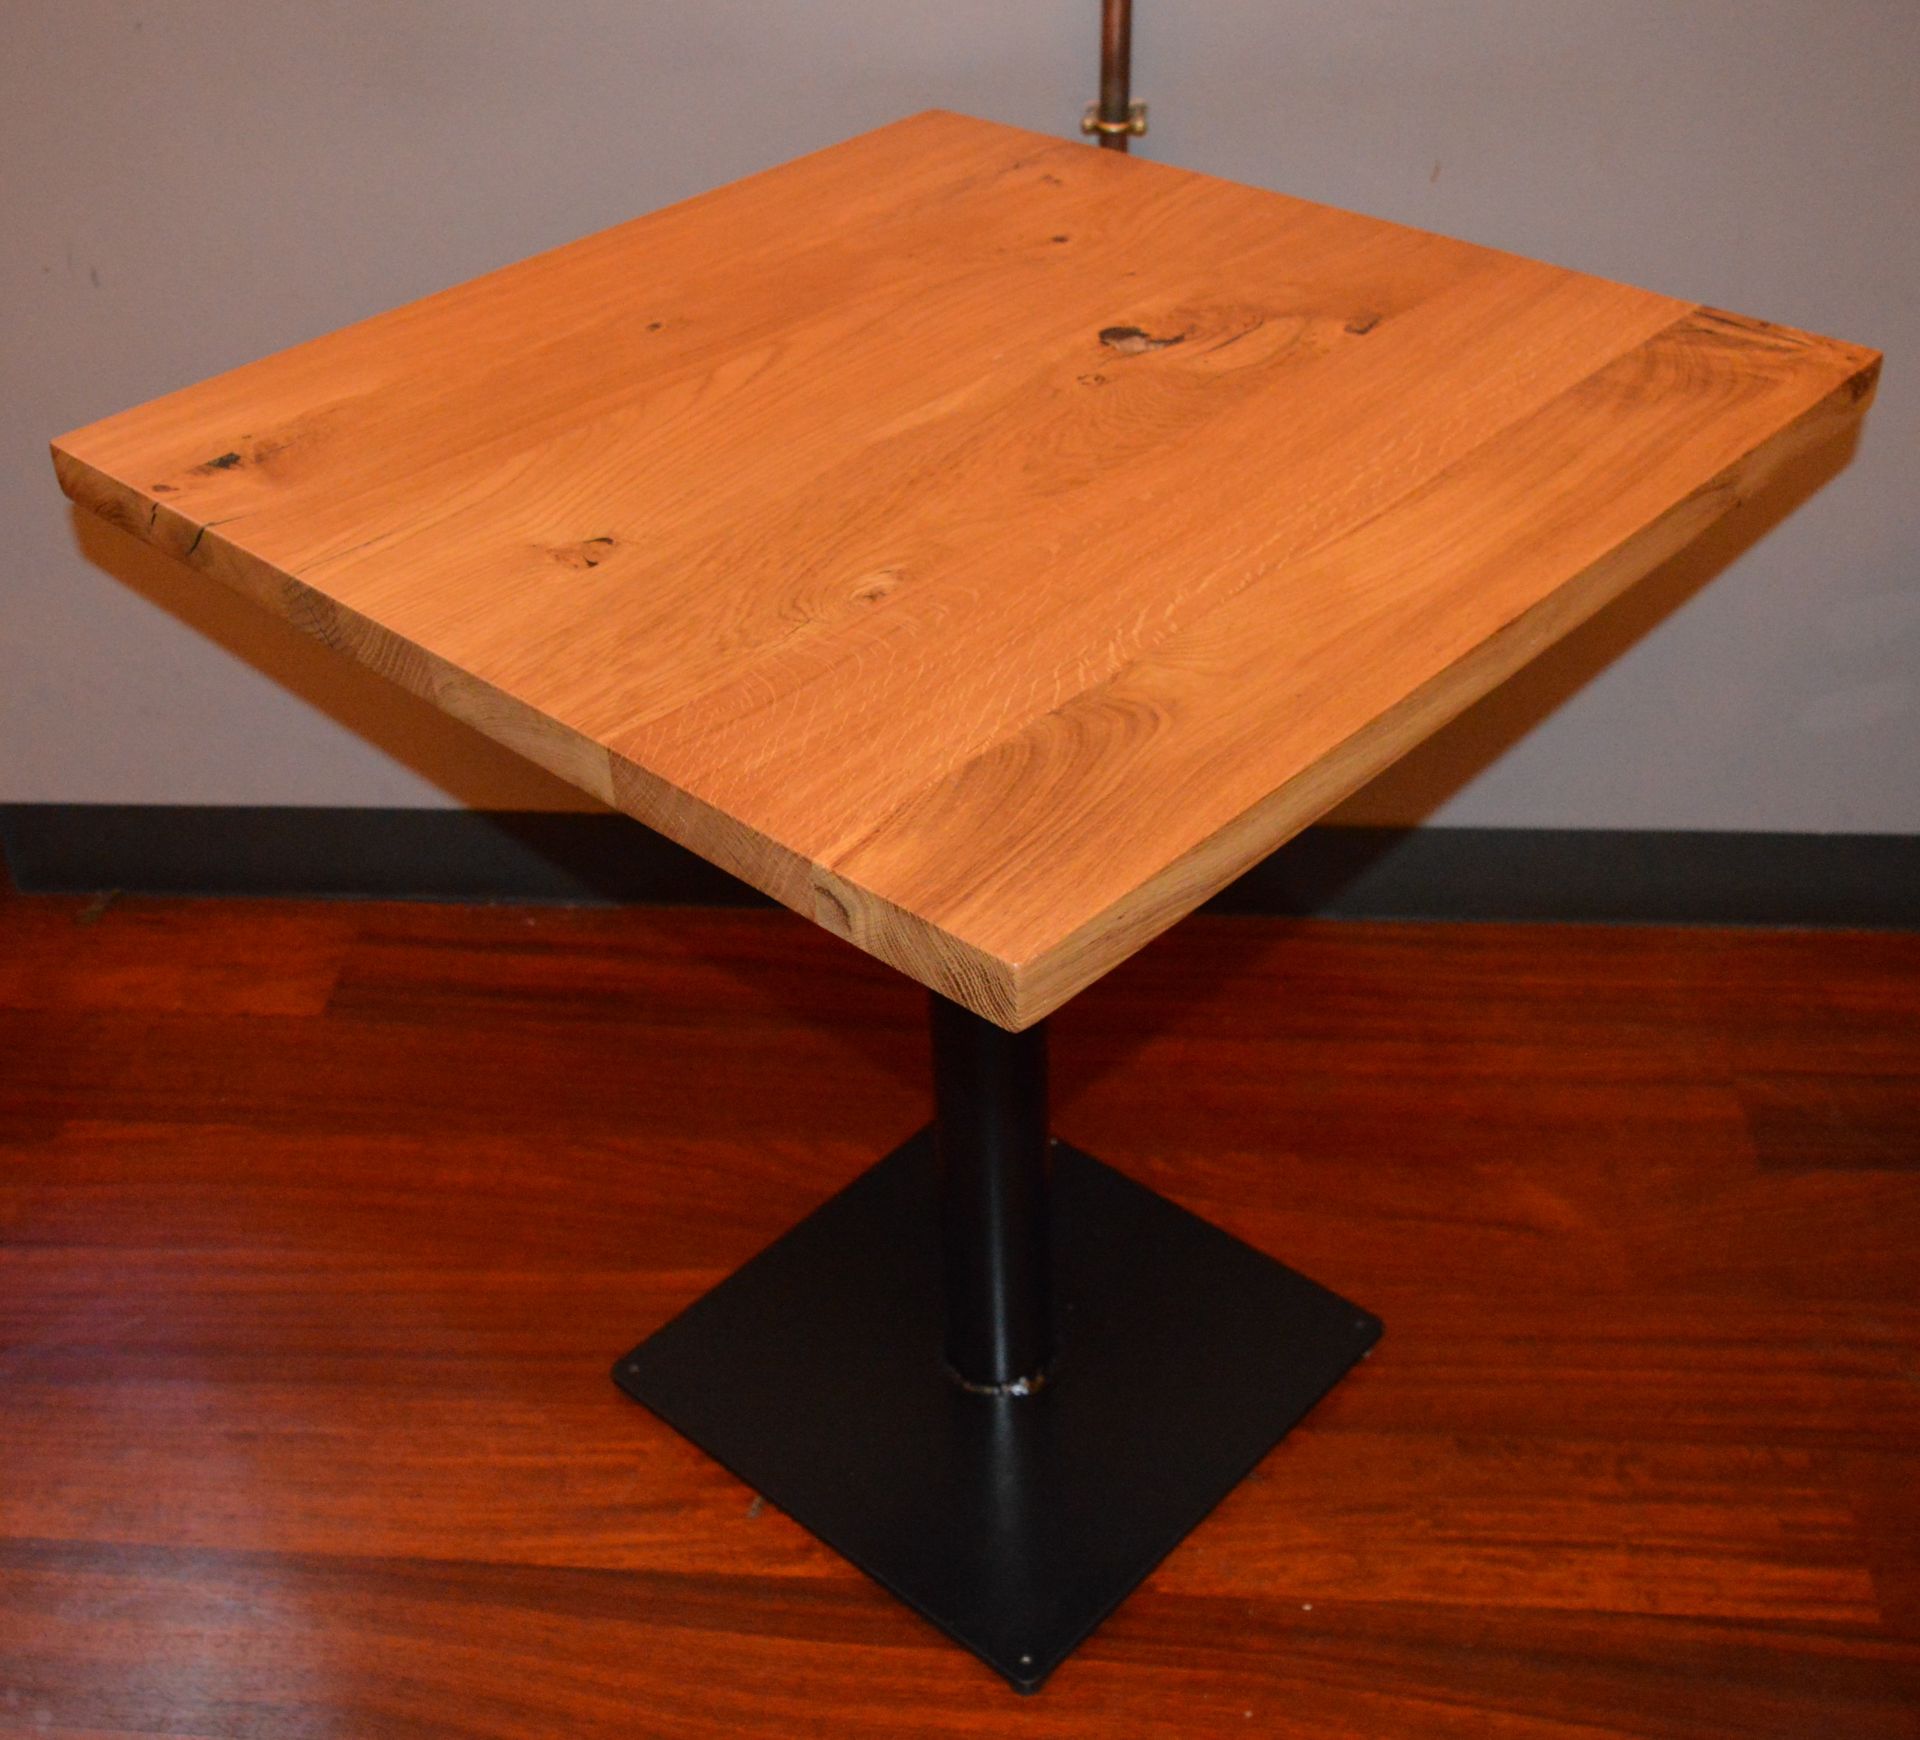 2 x Rustic Knotty Oak Bistro Tables - Suitable For Pubs & Restaurants - Substantial Bases With Solid